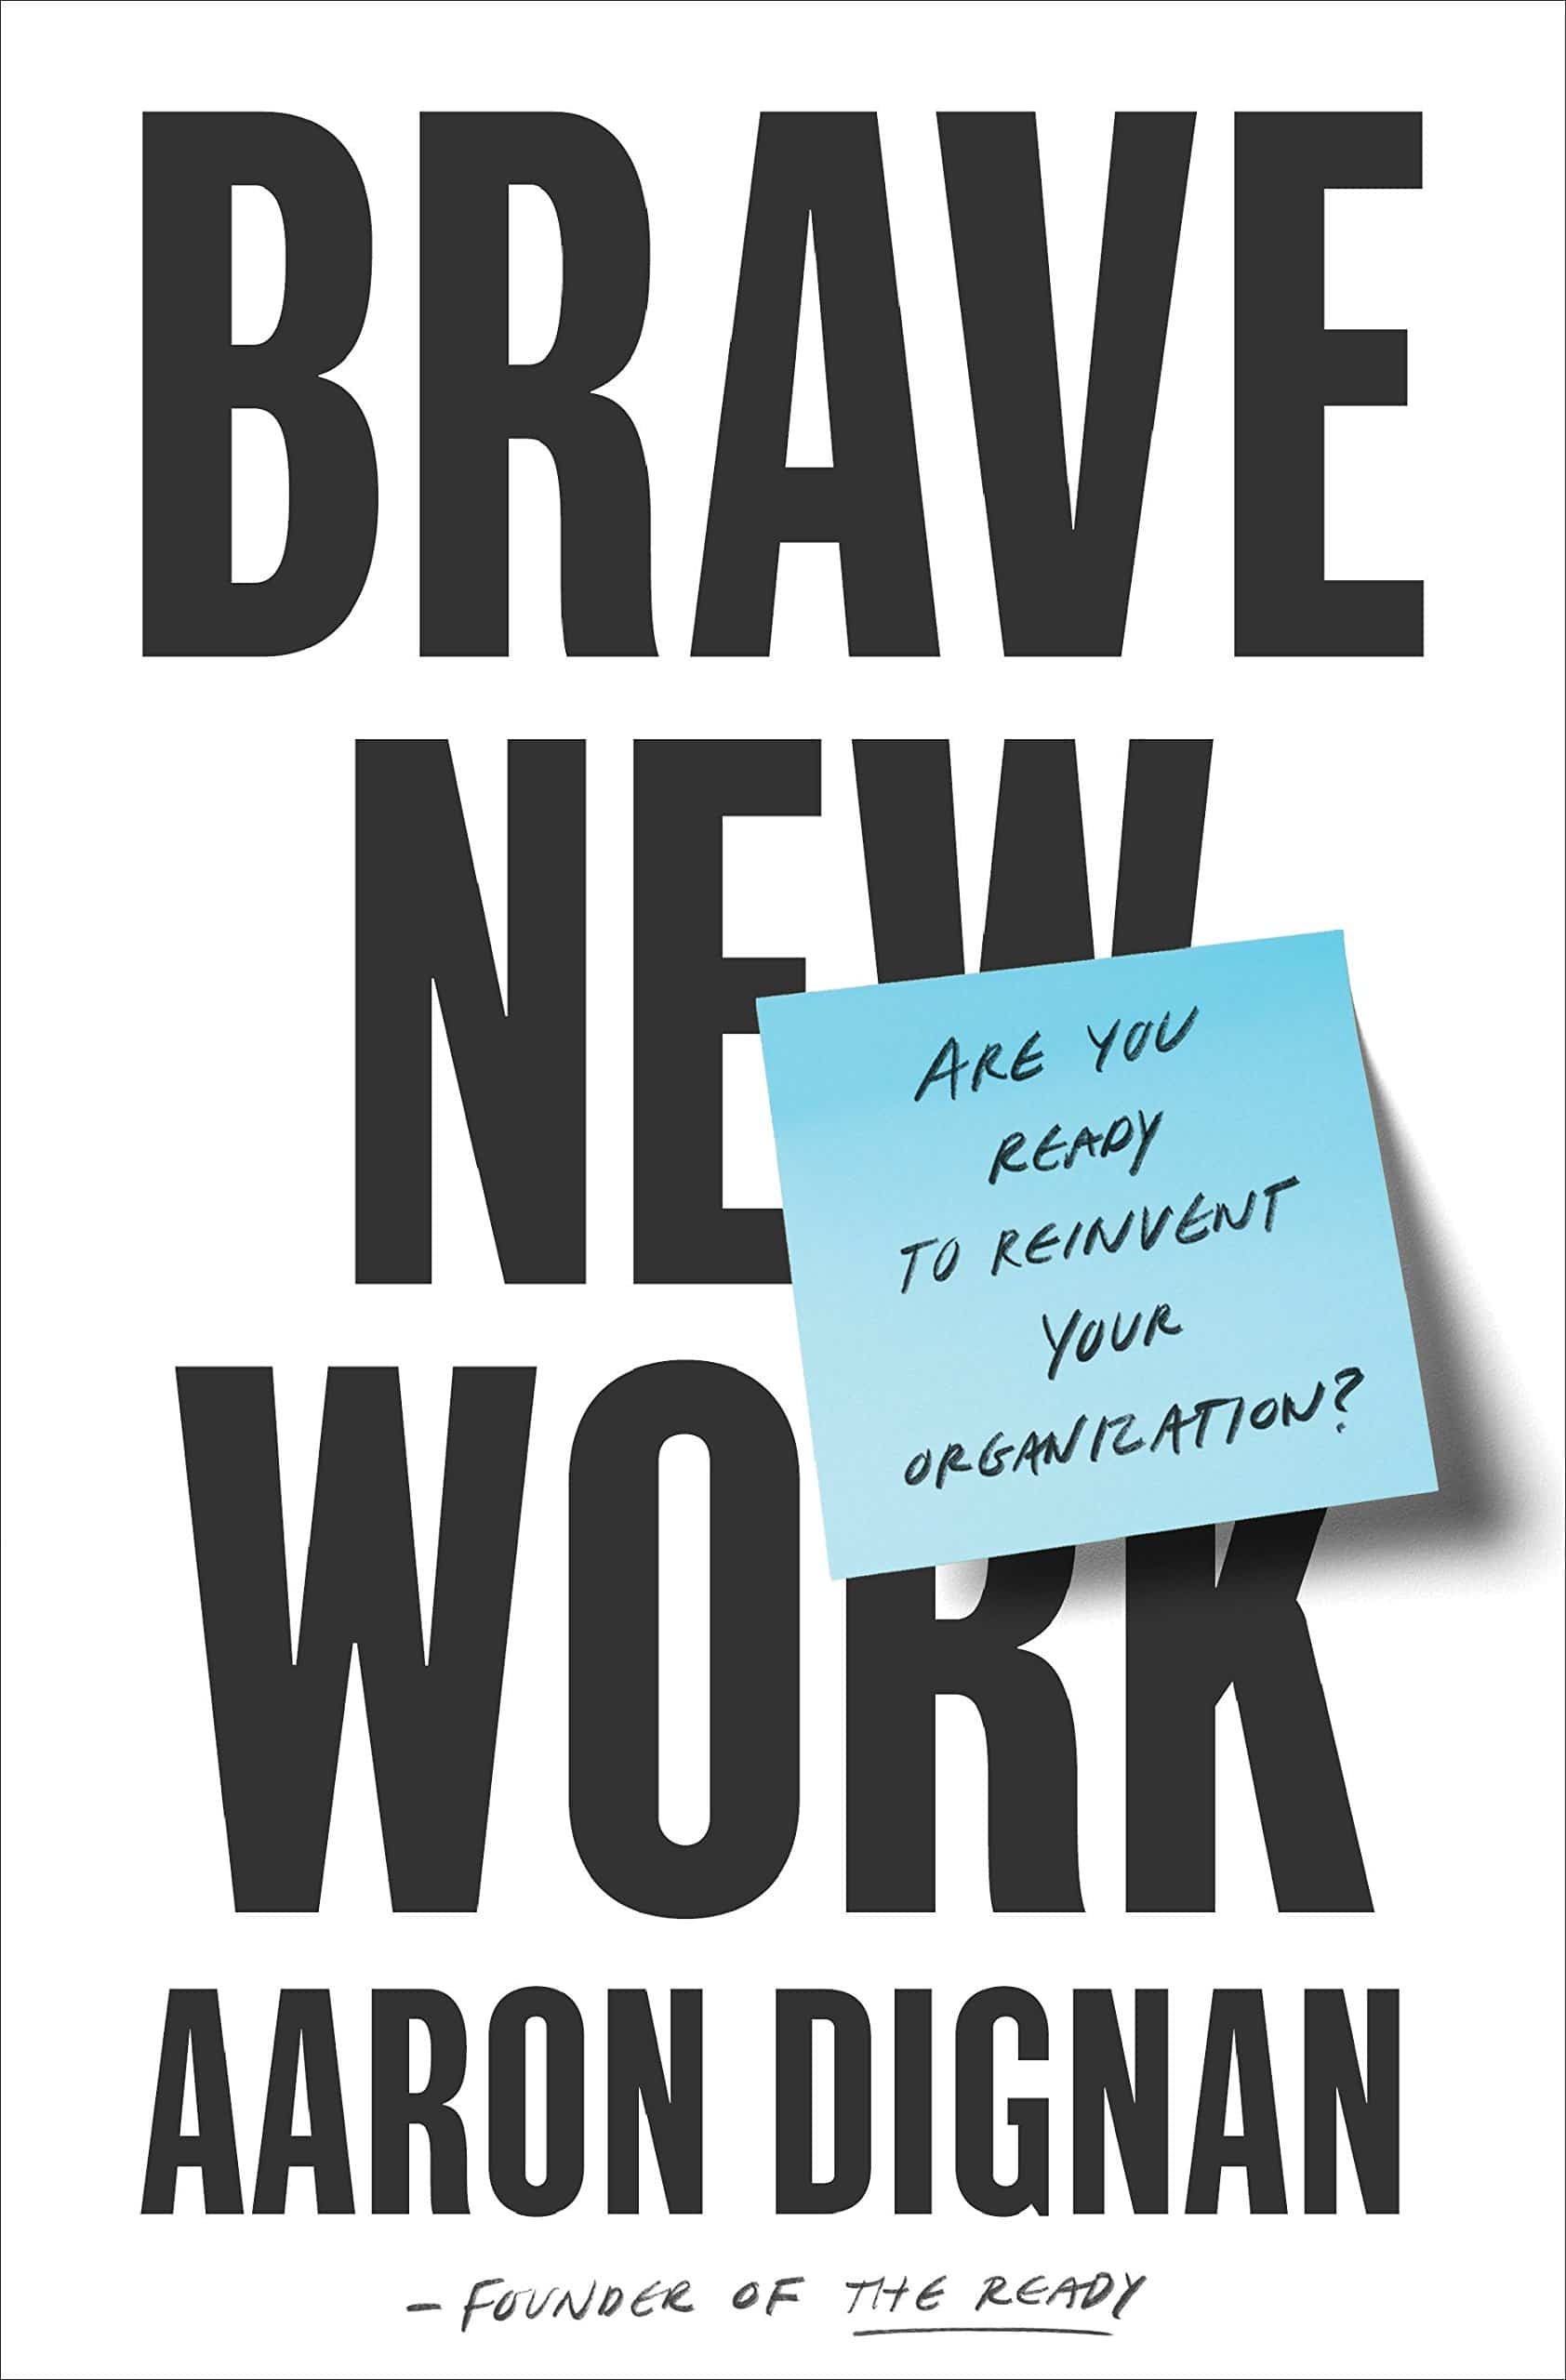 The cover of Brave New Work